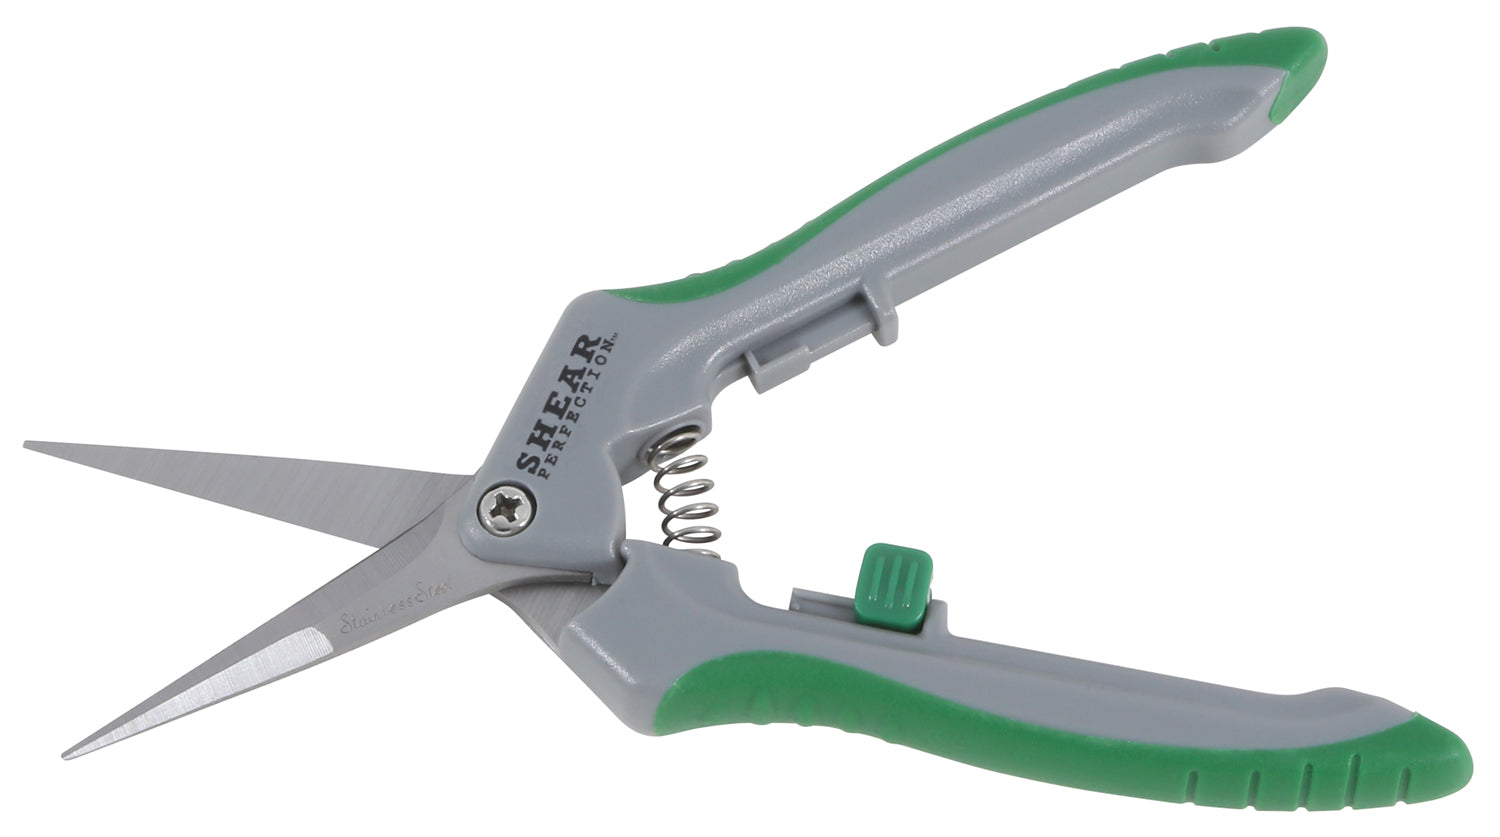 Shear Perfection Platinum Stainless Trimming Shear - 2 in Straight Blades